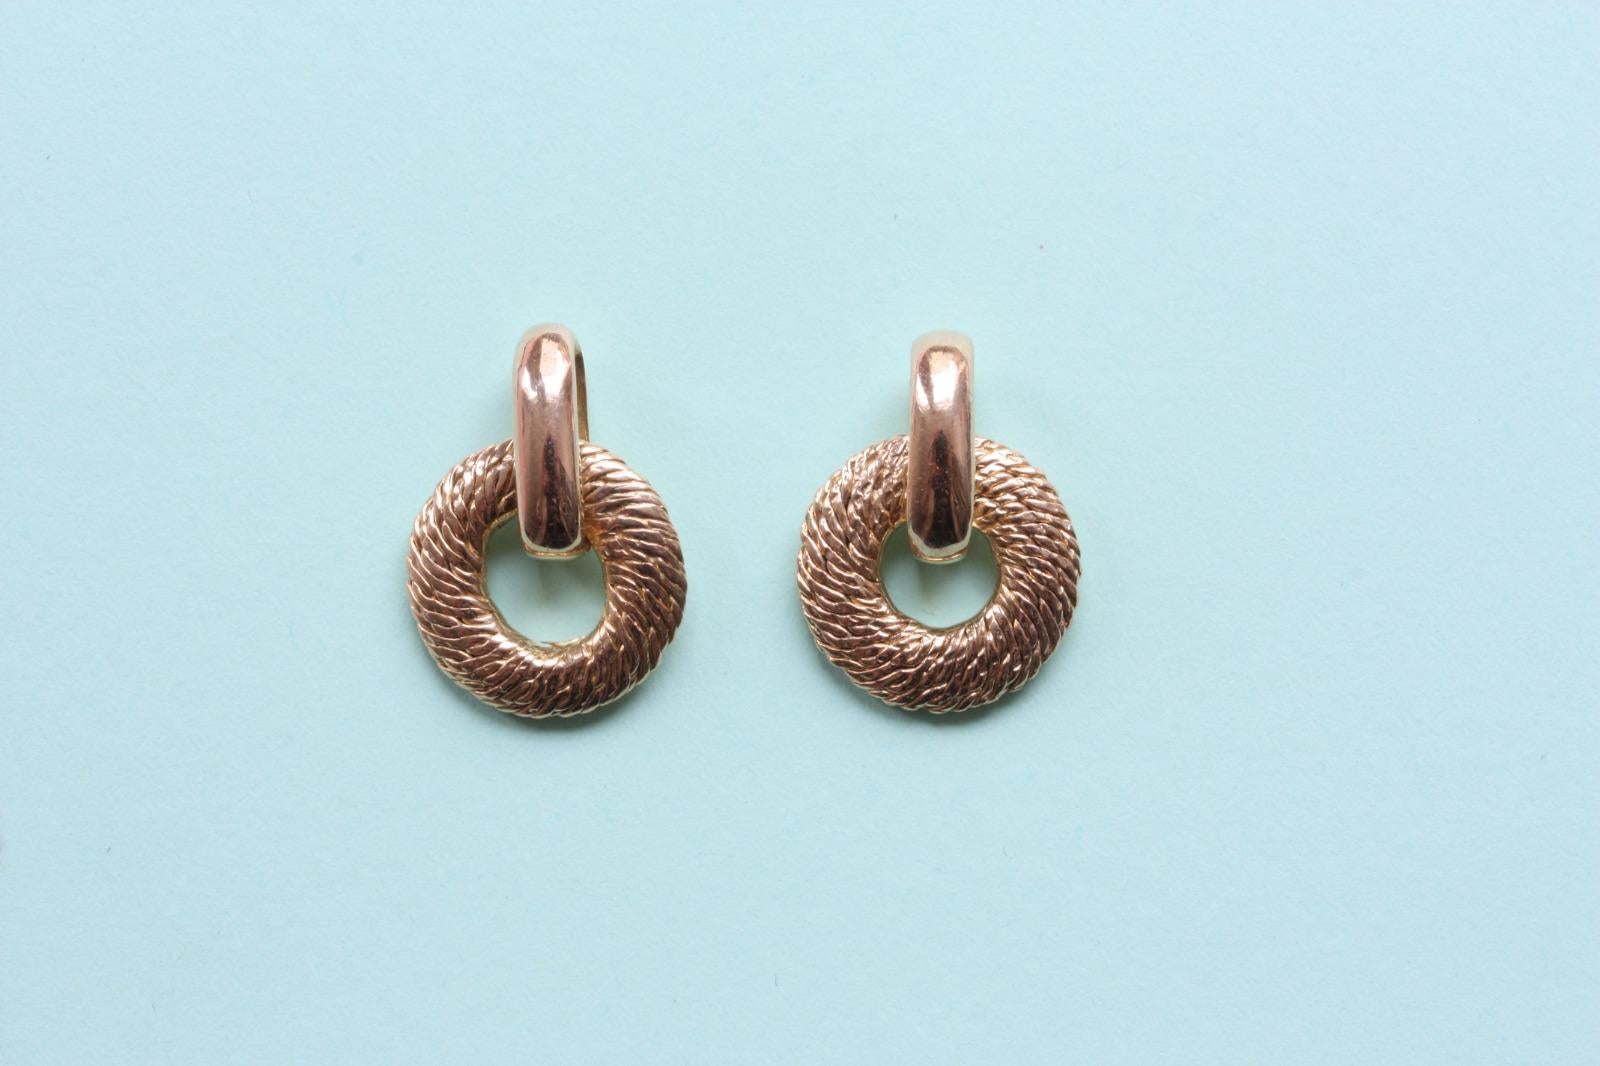 A pair of 18 carat gold earrings with a woven textured disc held by a polished straight ring (most likely an element from a Georges Lenfant chain or bracelet).

weight: 8.83 grams
dimensions: 19.8 x 14 mm